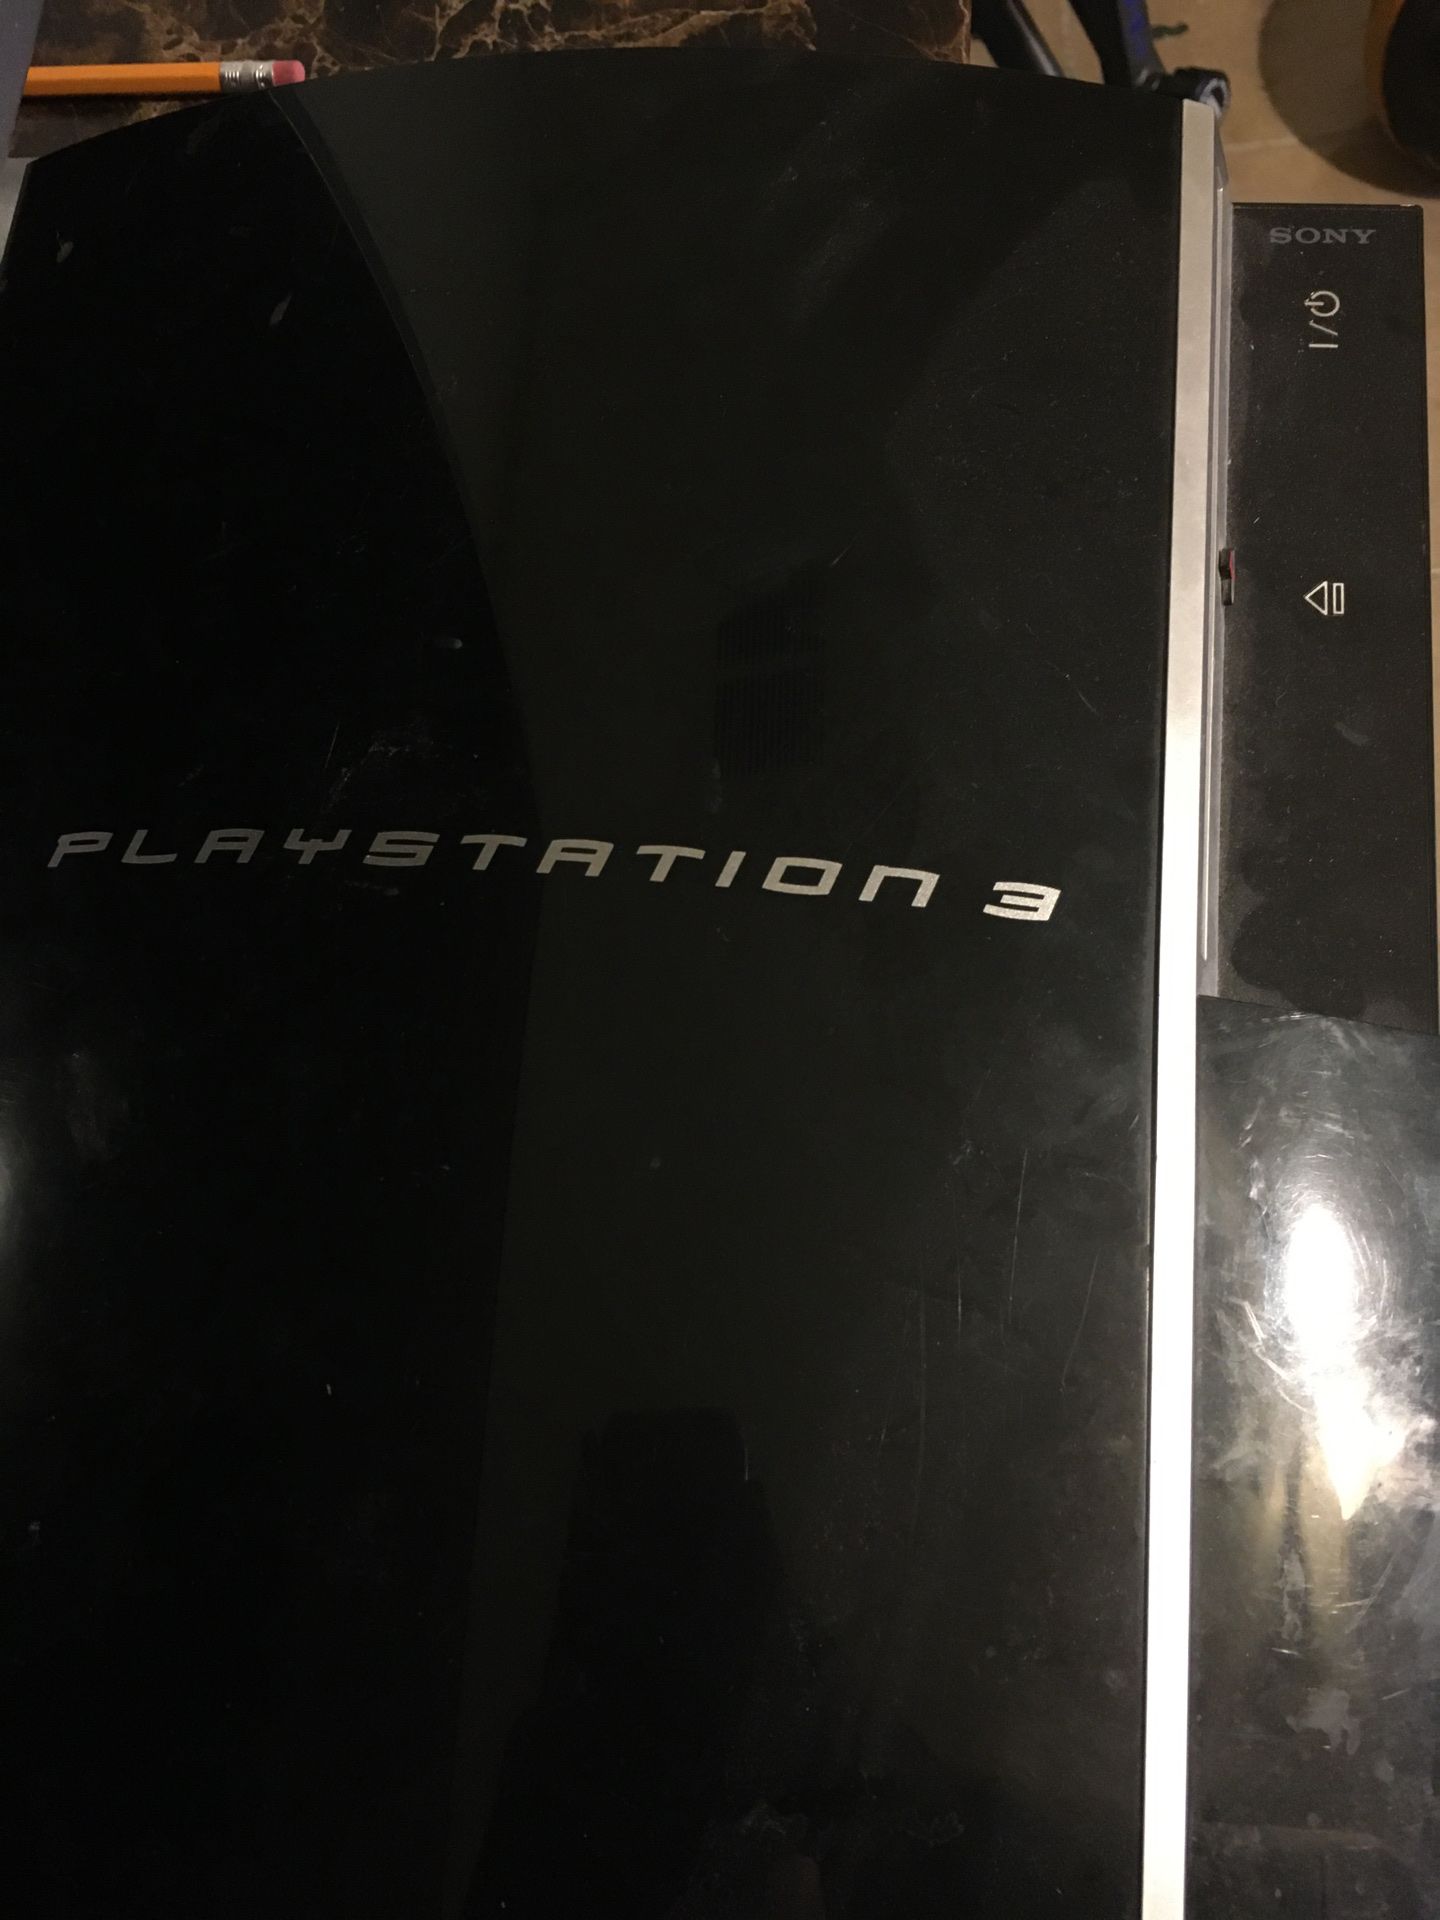 A broken ps3 ( use for parts )